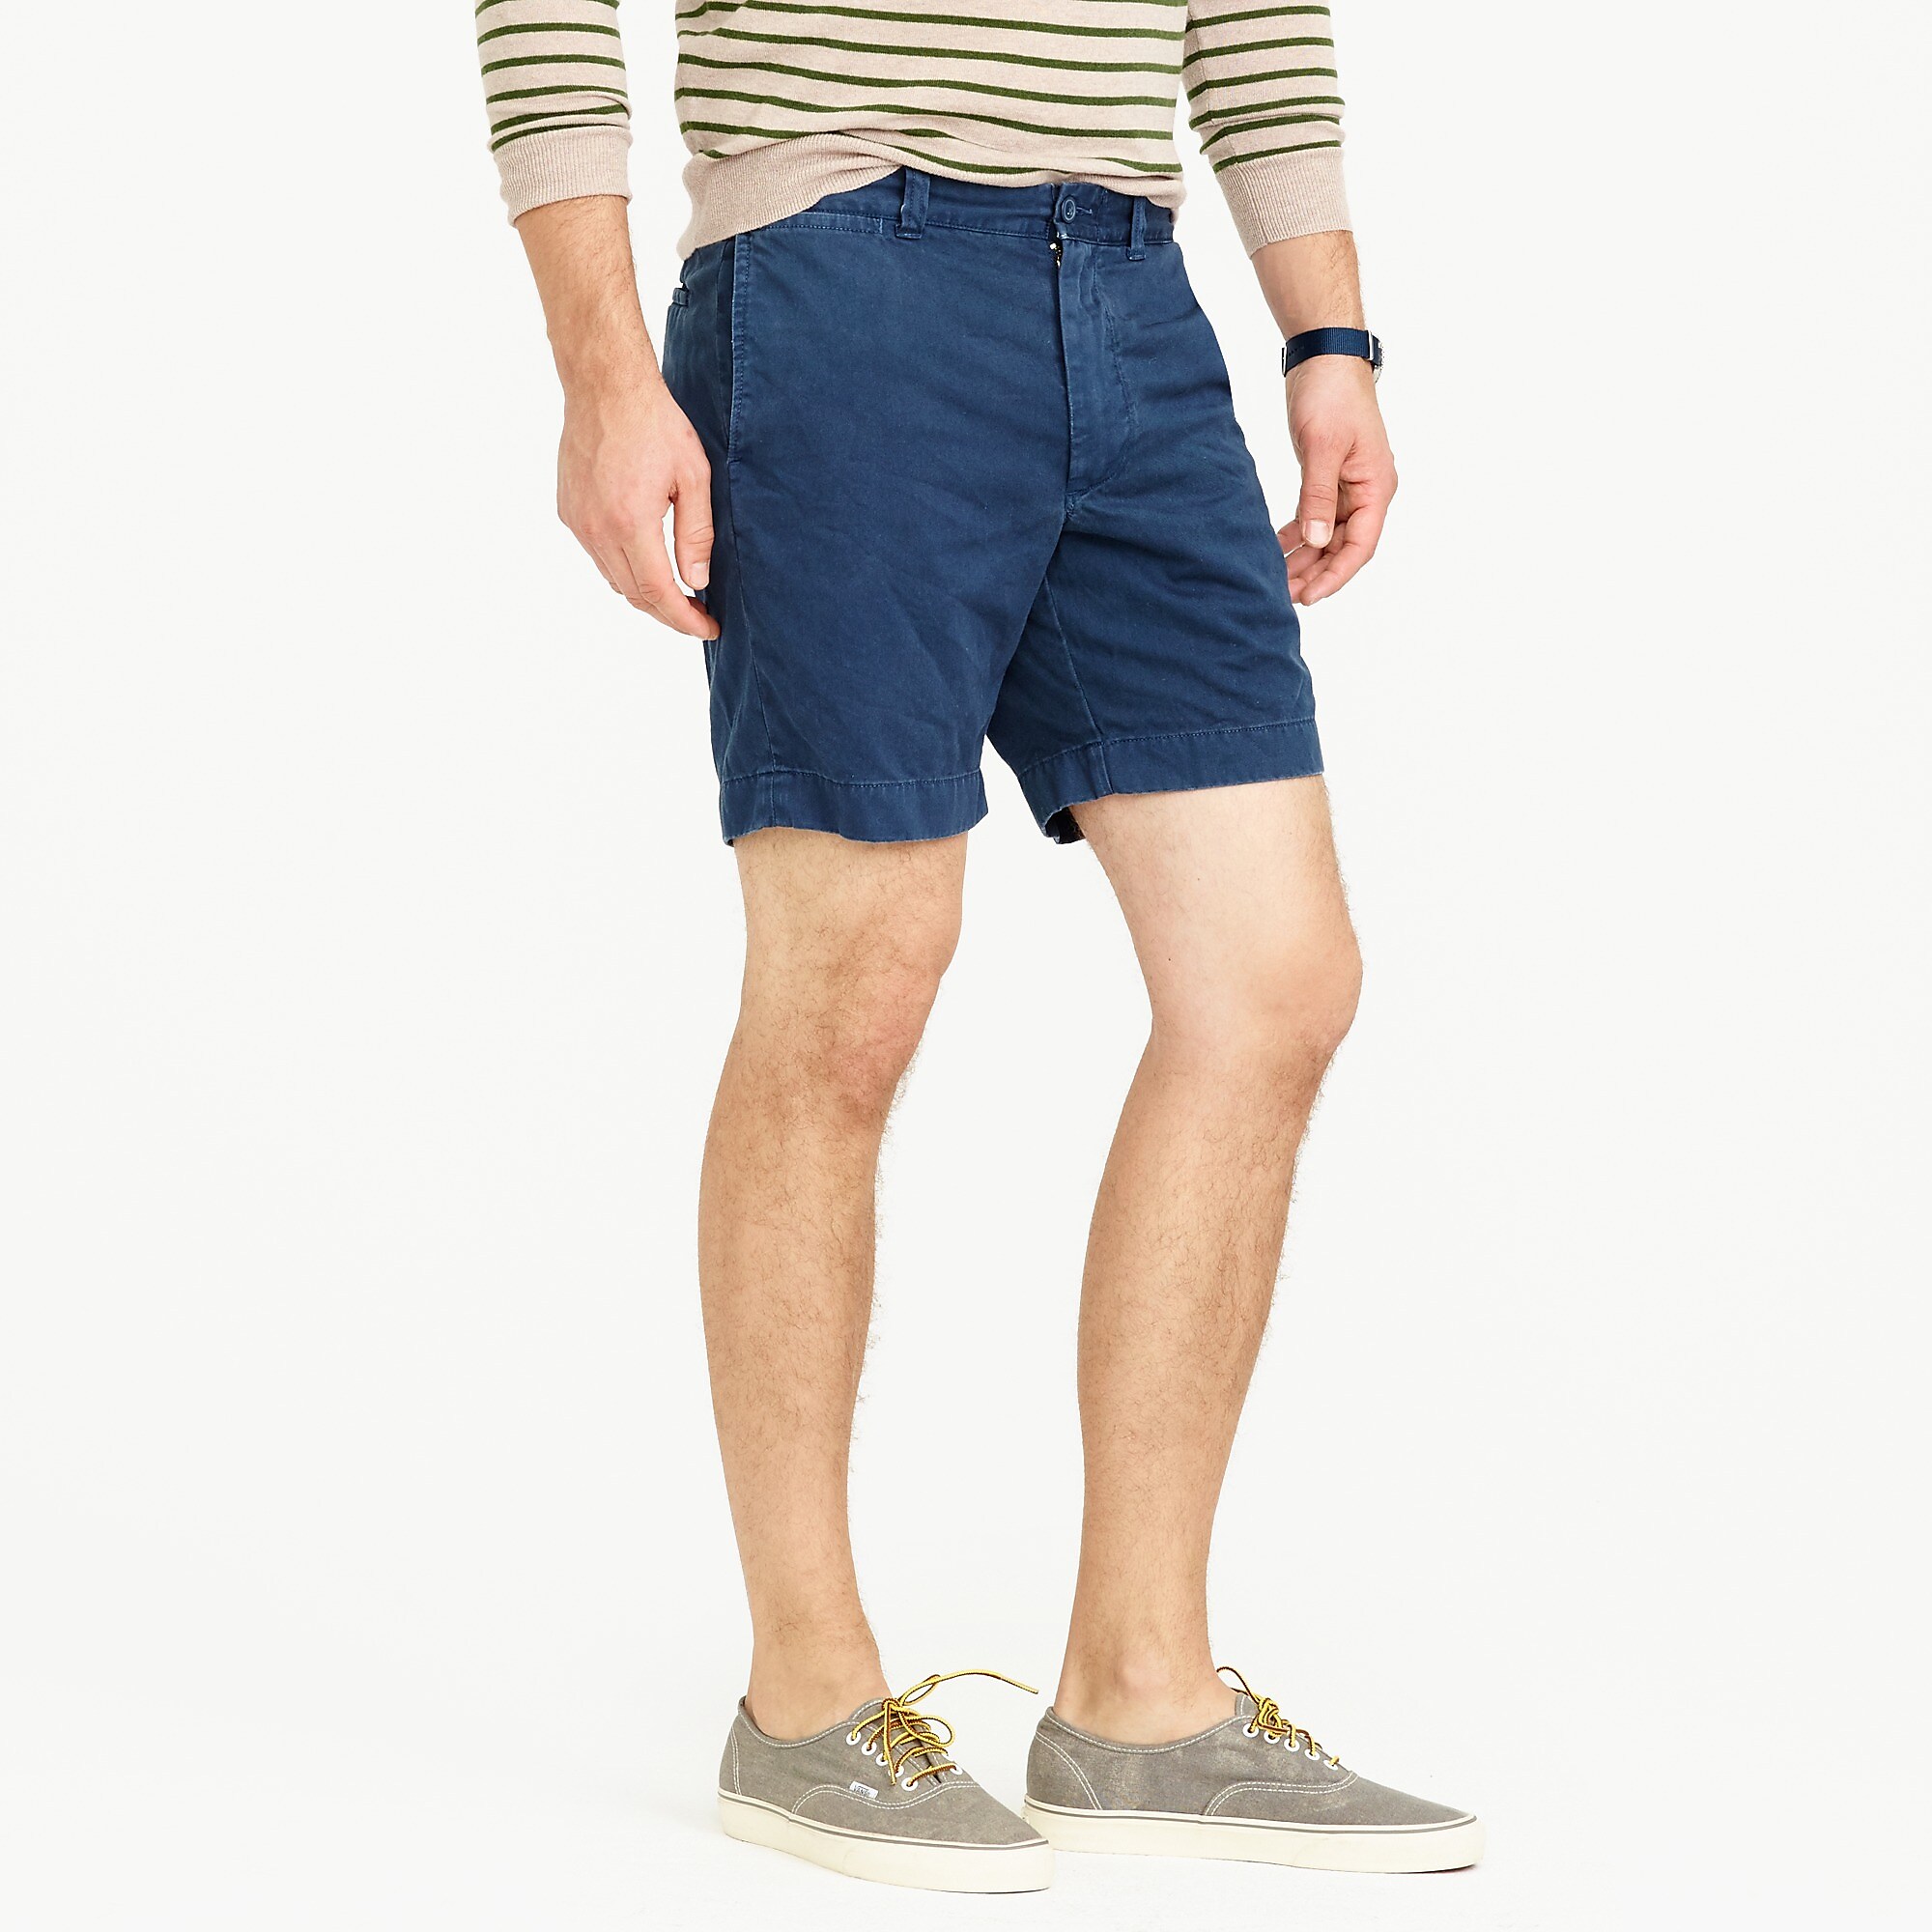 7 inch inseam shorts meaning